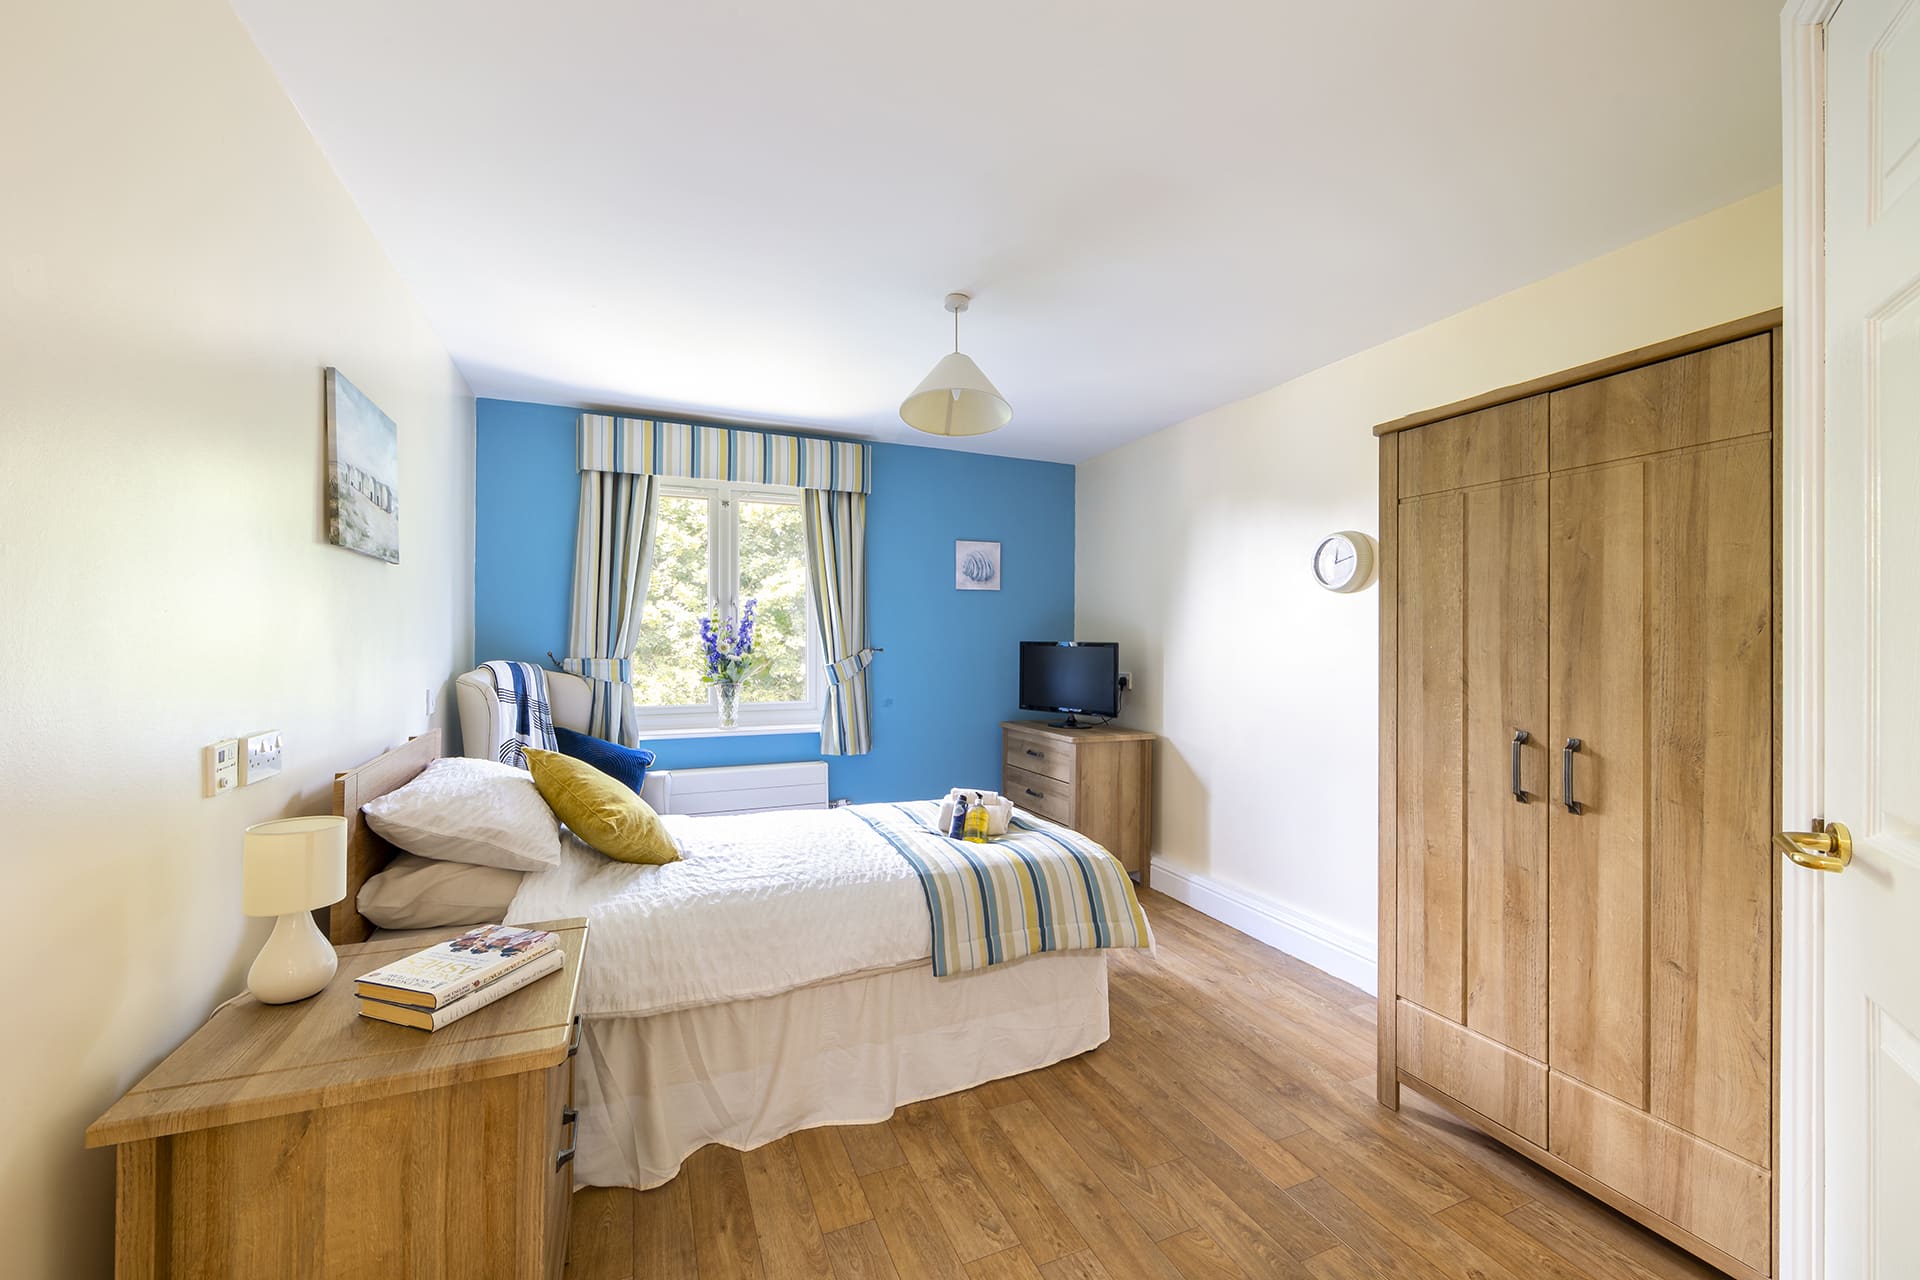 Large single bedroom at Lily House Care Home in Ely.